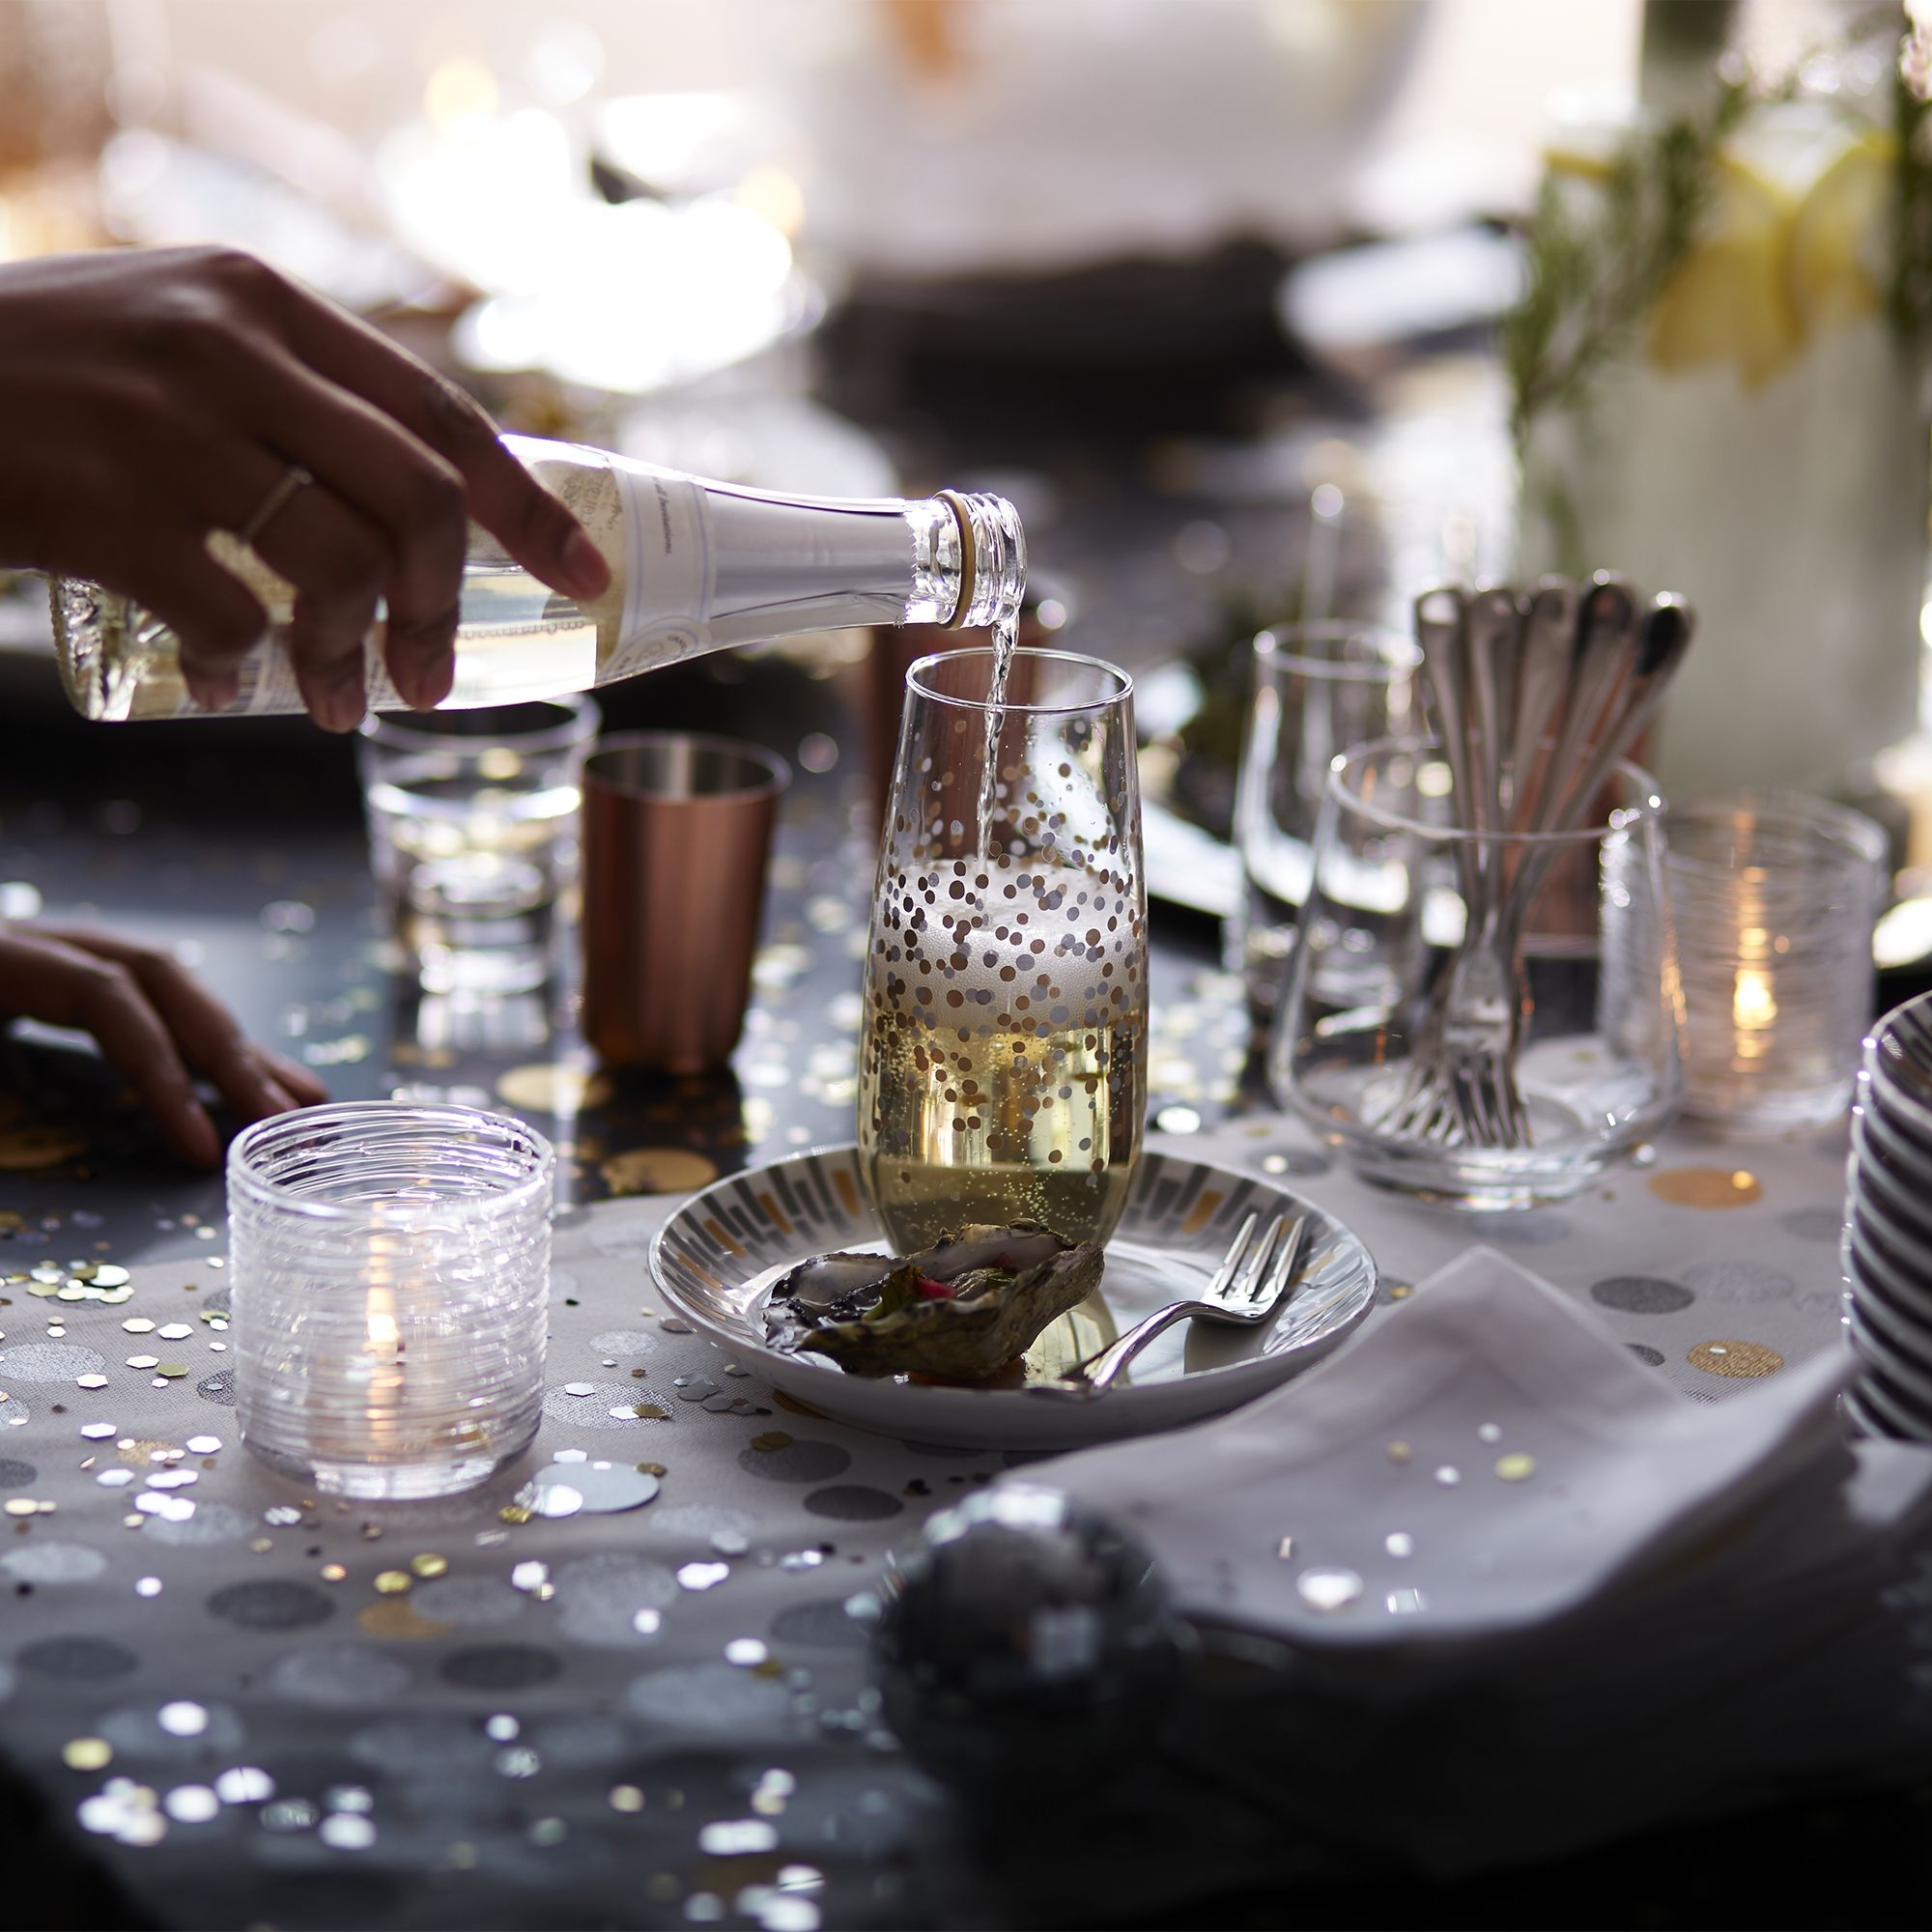 ▲Crate and Barrel Christmas Party Table。（圖／Crate and Barrel提供）